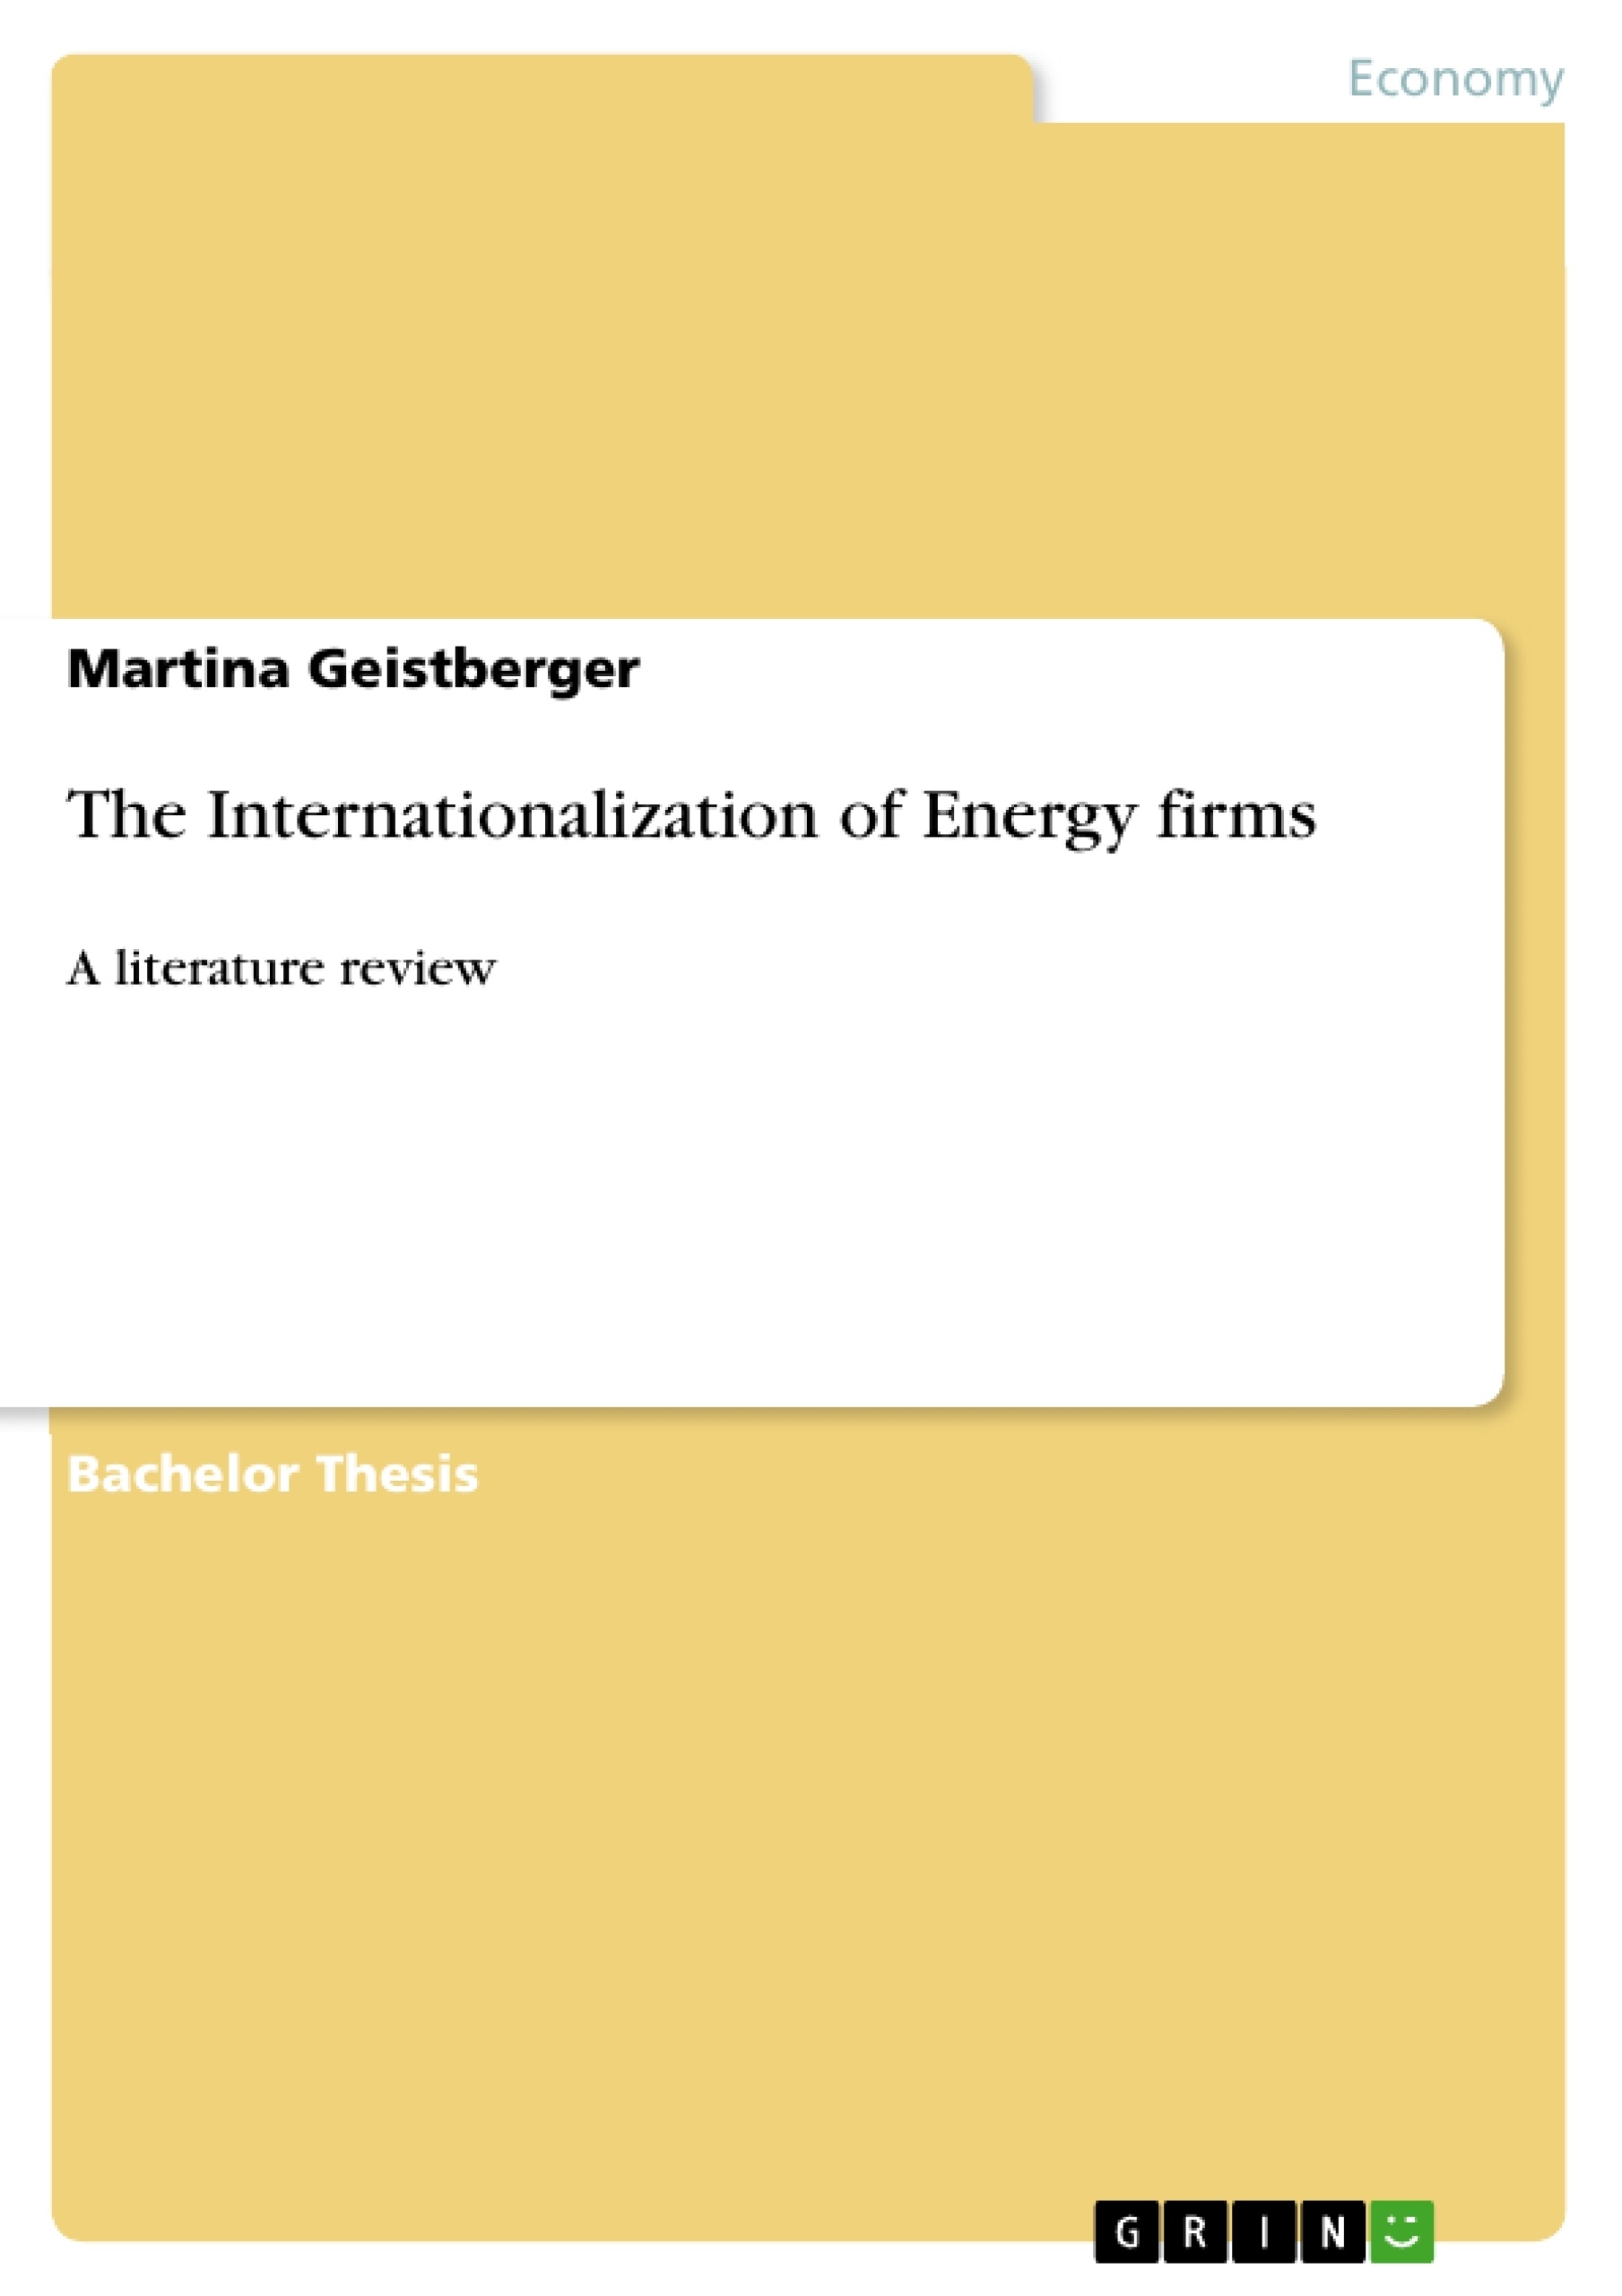 Titre: The Internationalization of Energy firms